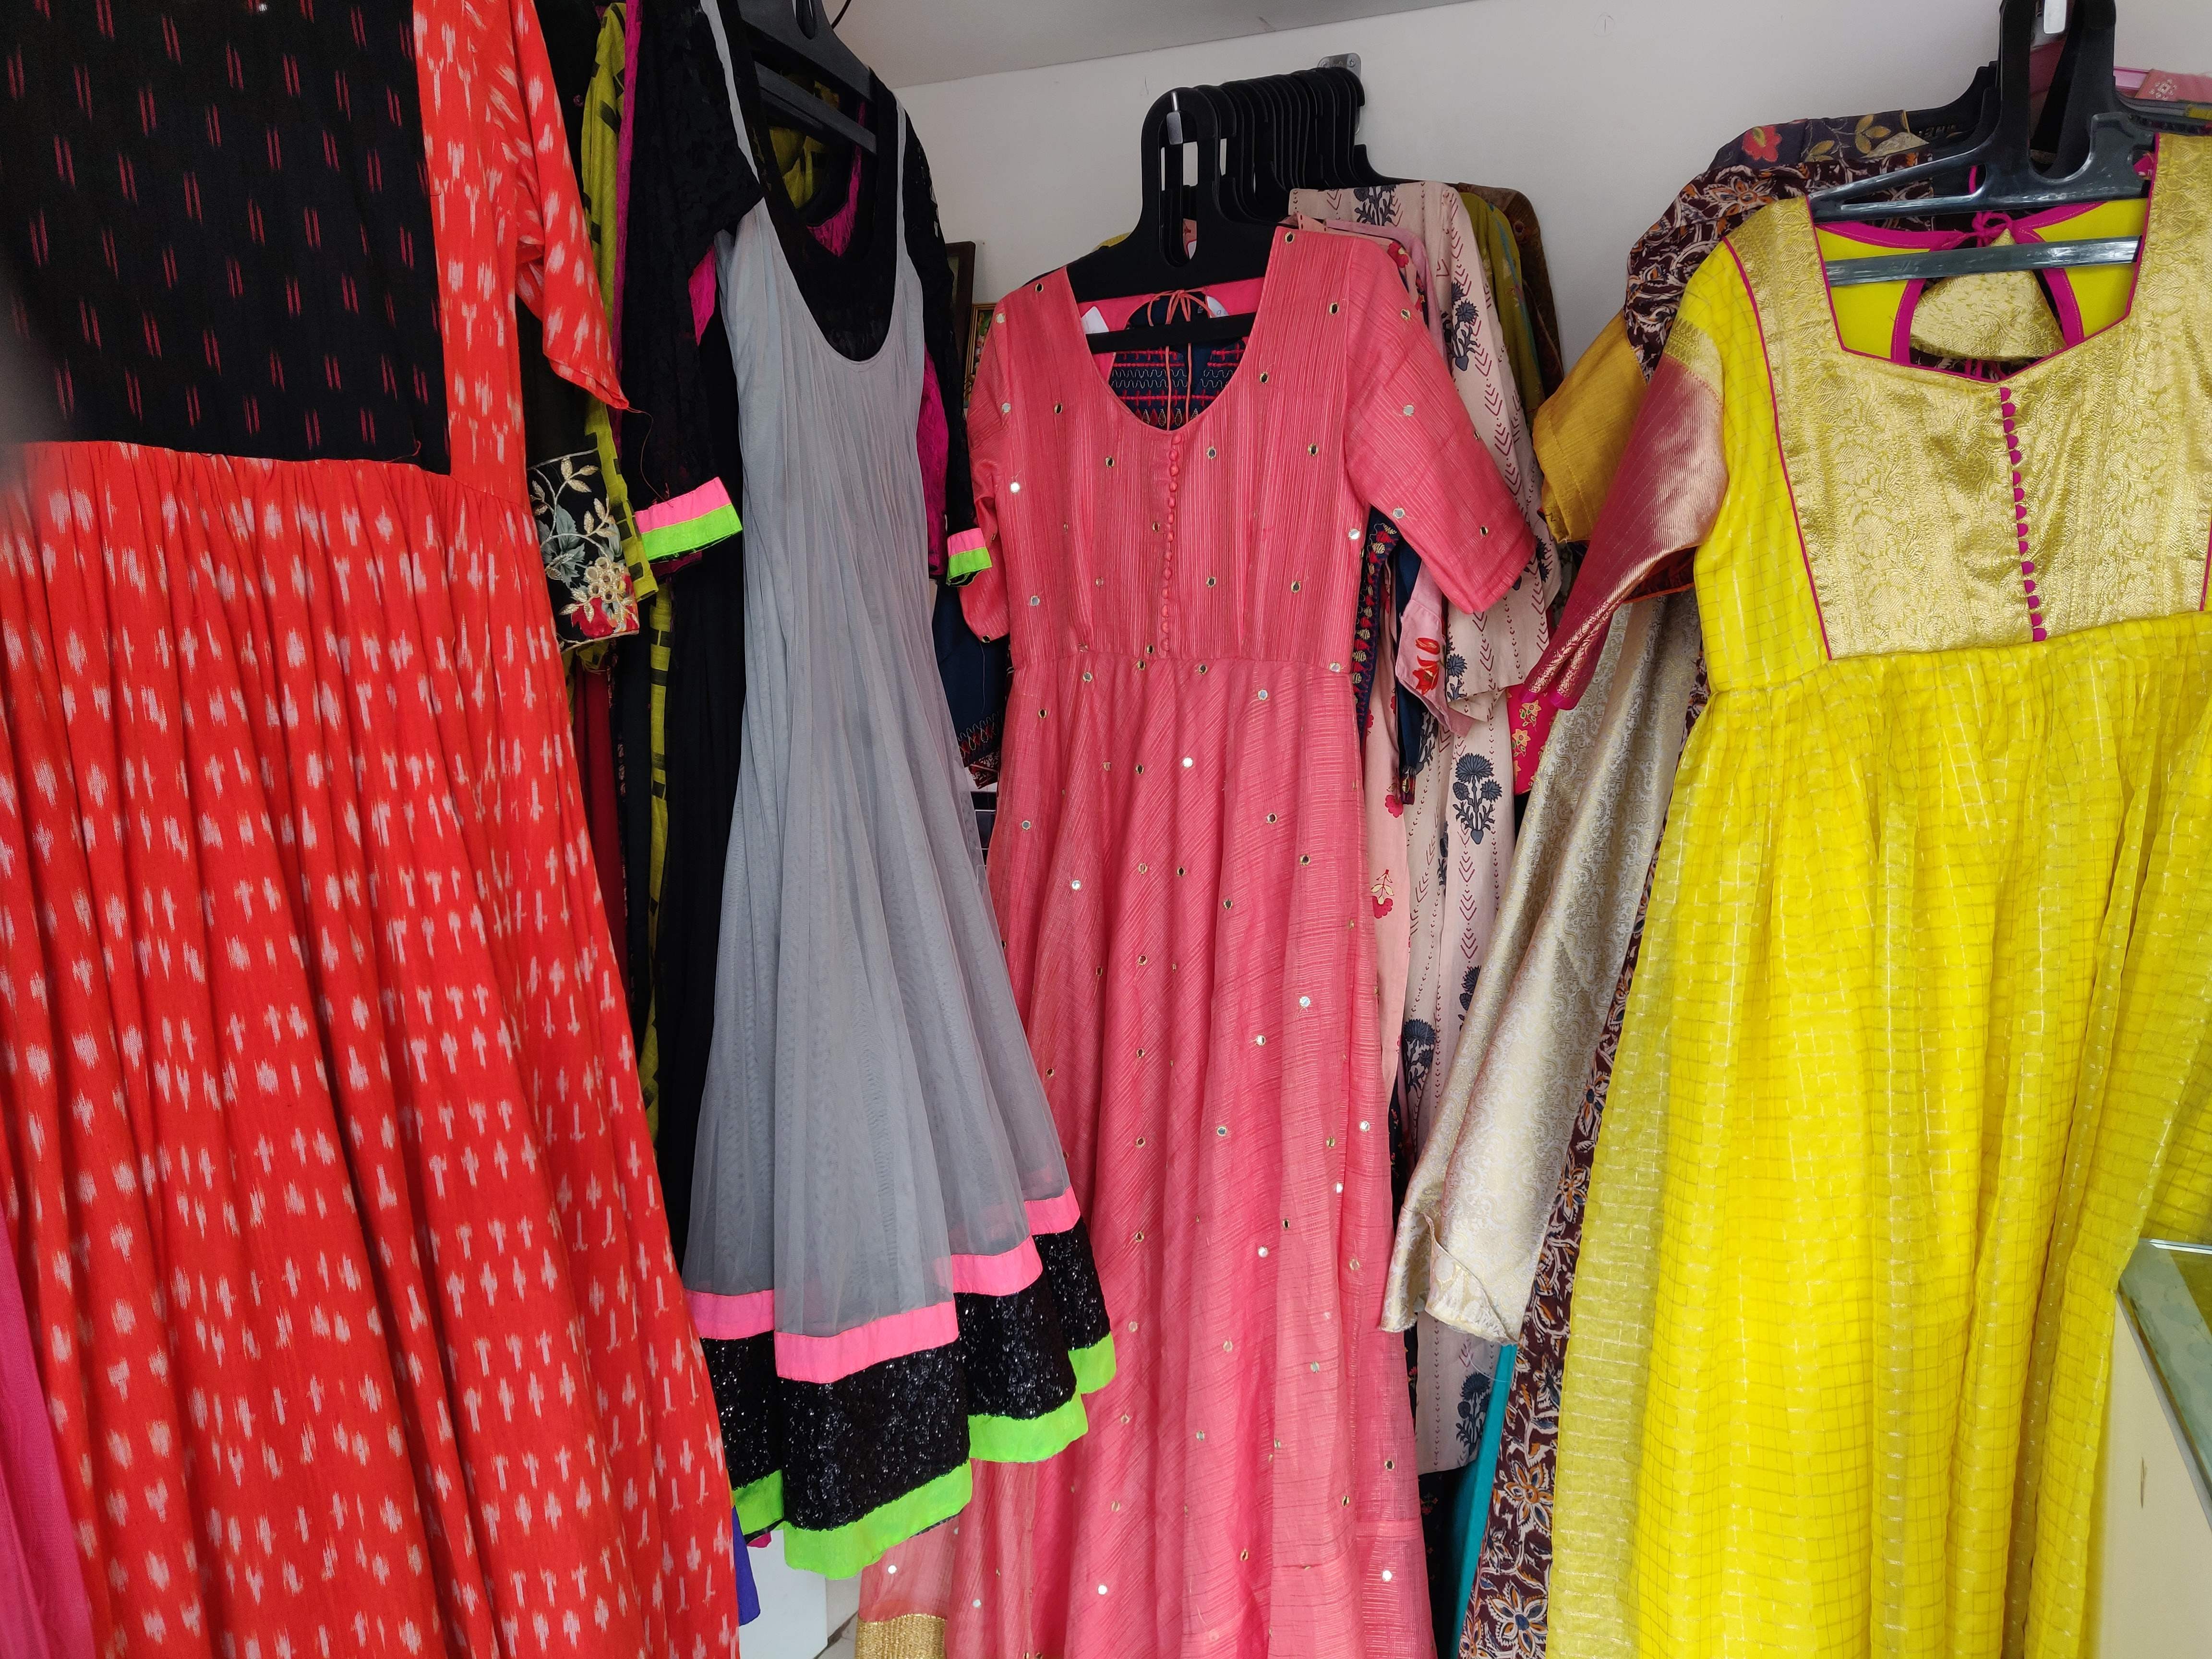 Clothing,Boutique,Pink,Dress,Yellow,Room,Formal wear,Fashion design,Textile,Magenta